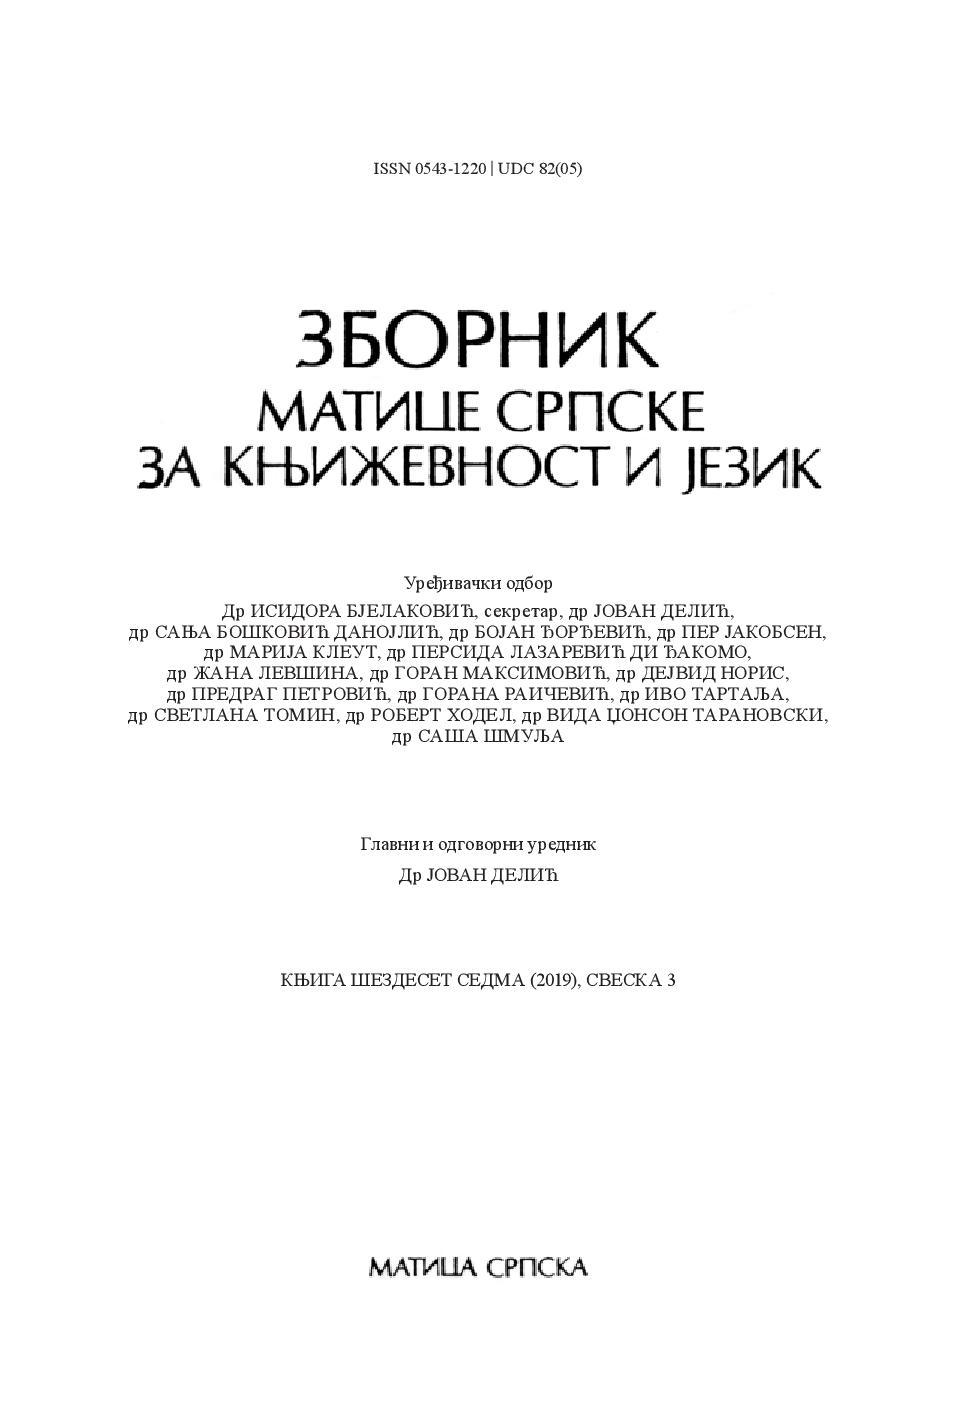 THE CHARACTERISTICS OF THE ENCYCLOPEDIC LITERARY MODUS IN THE LITERARY WORKS OF DANILO KIŠ Cover Image